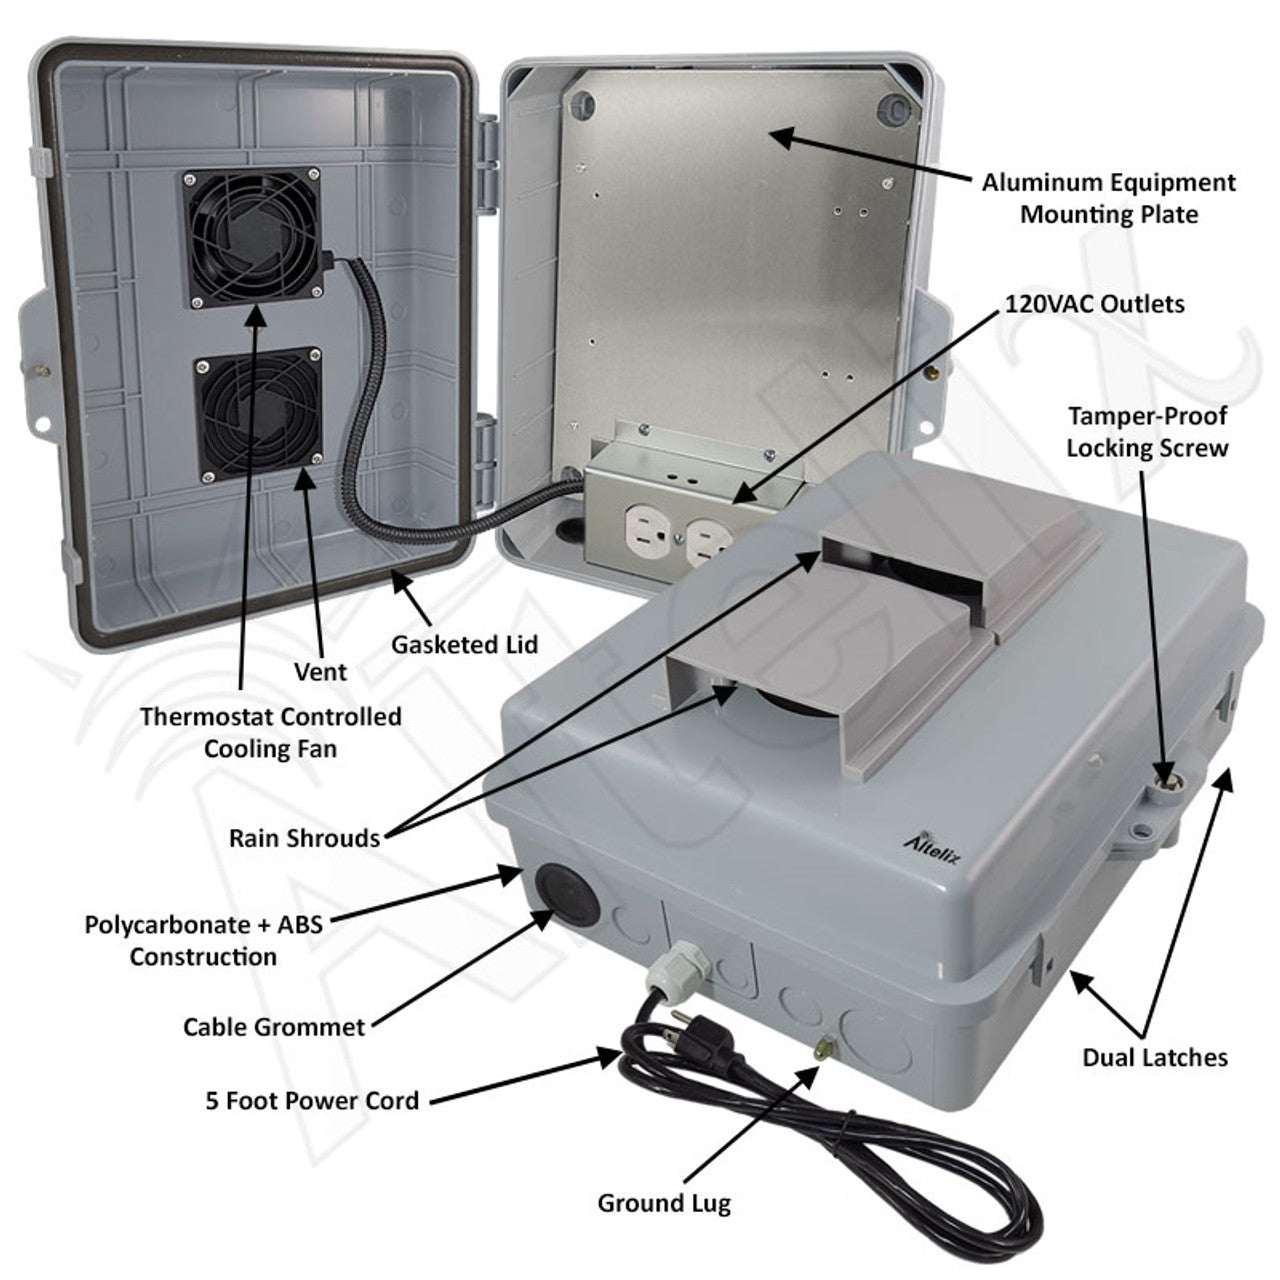 Altelix 14x11x5 Vented Polycarbonate + ABS Weatherproof NEMA Enclosure with Cooling Fan, 120 VAC Outlets & Power Cord - 0